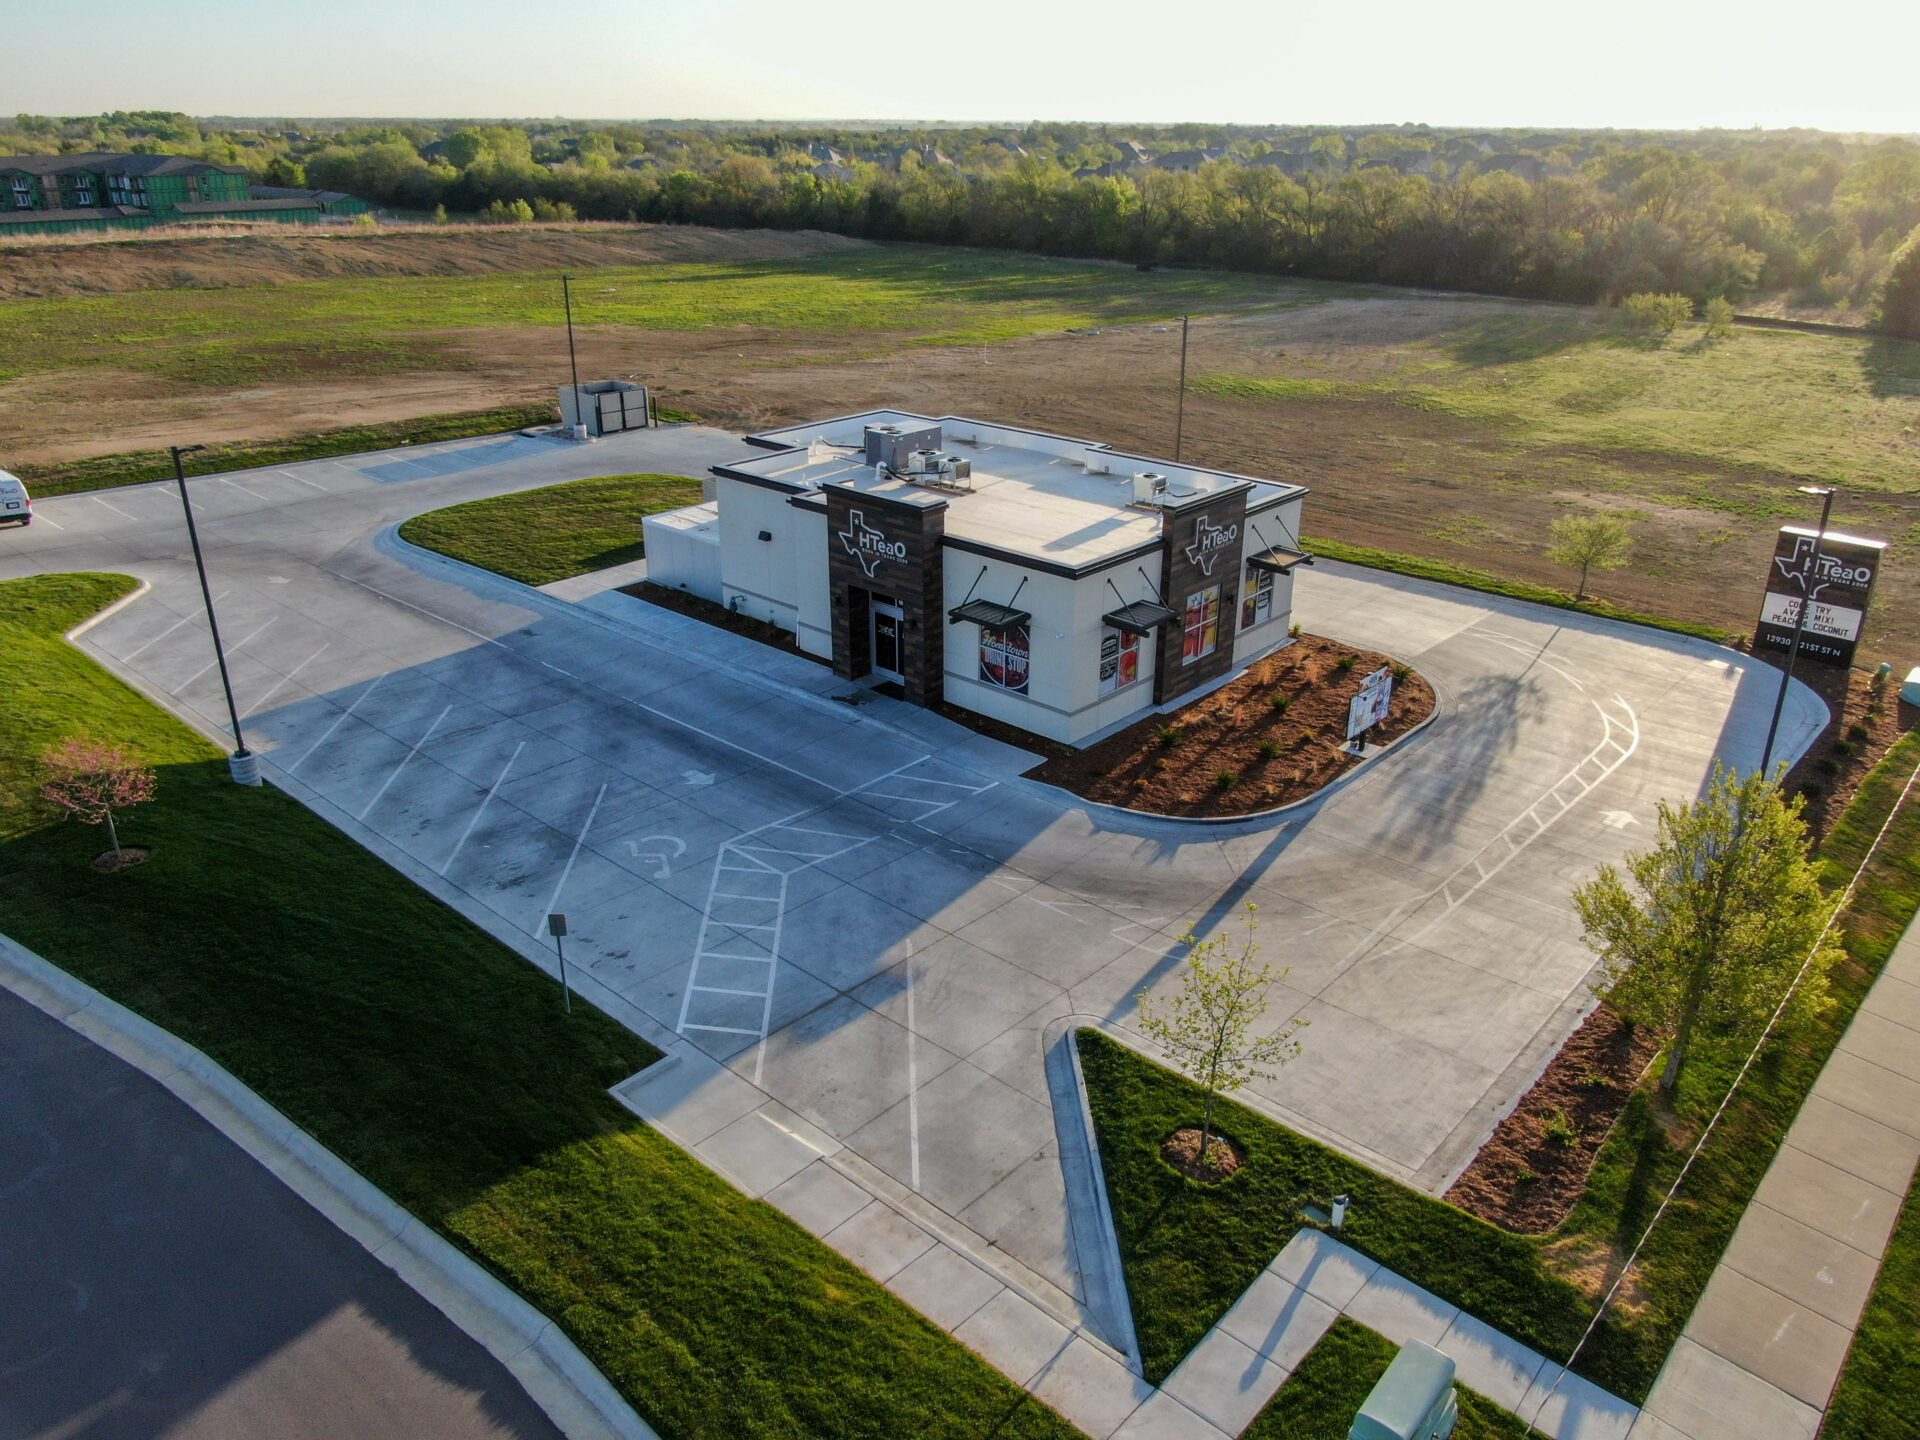 Exterior drone shot of the building, includes the signage and parking lot.